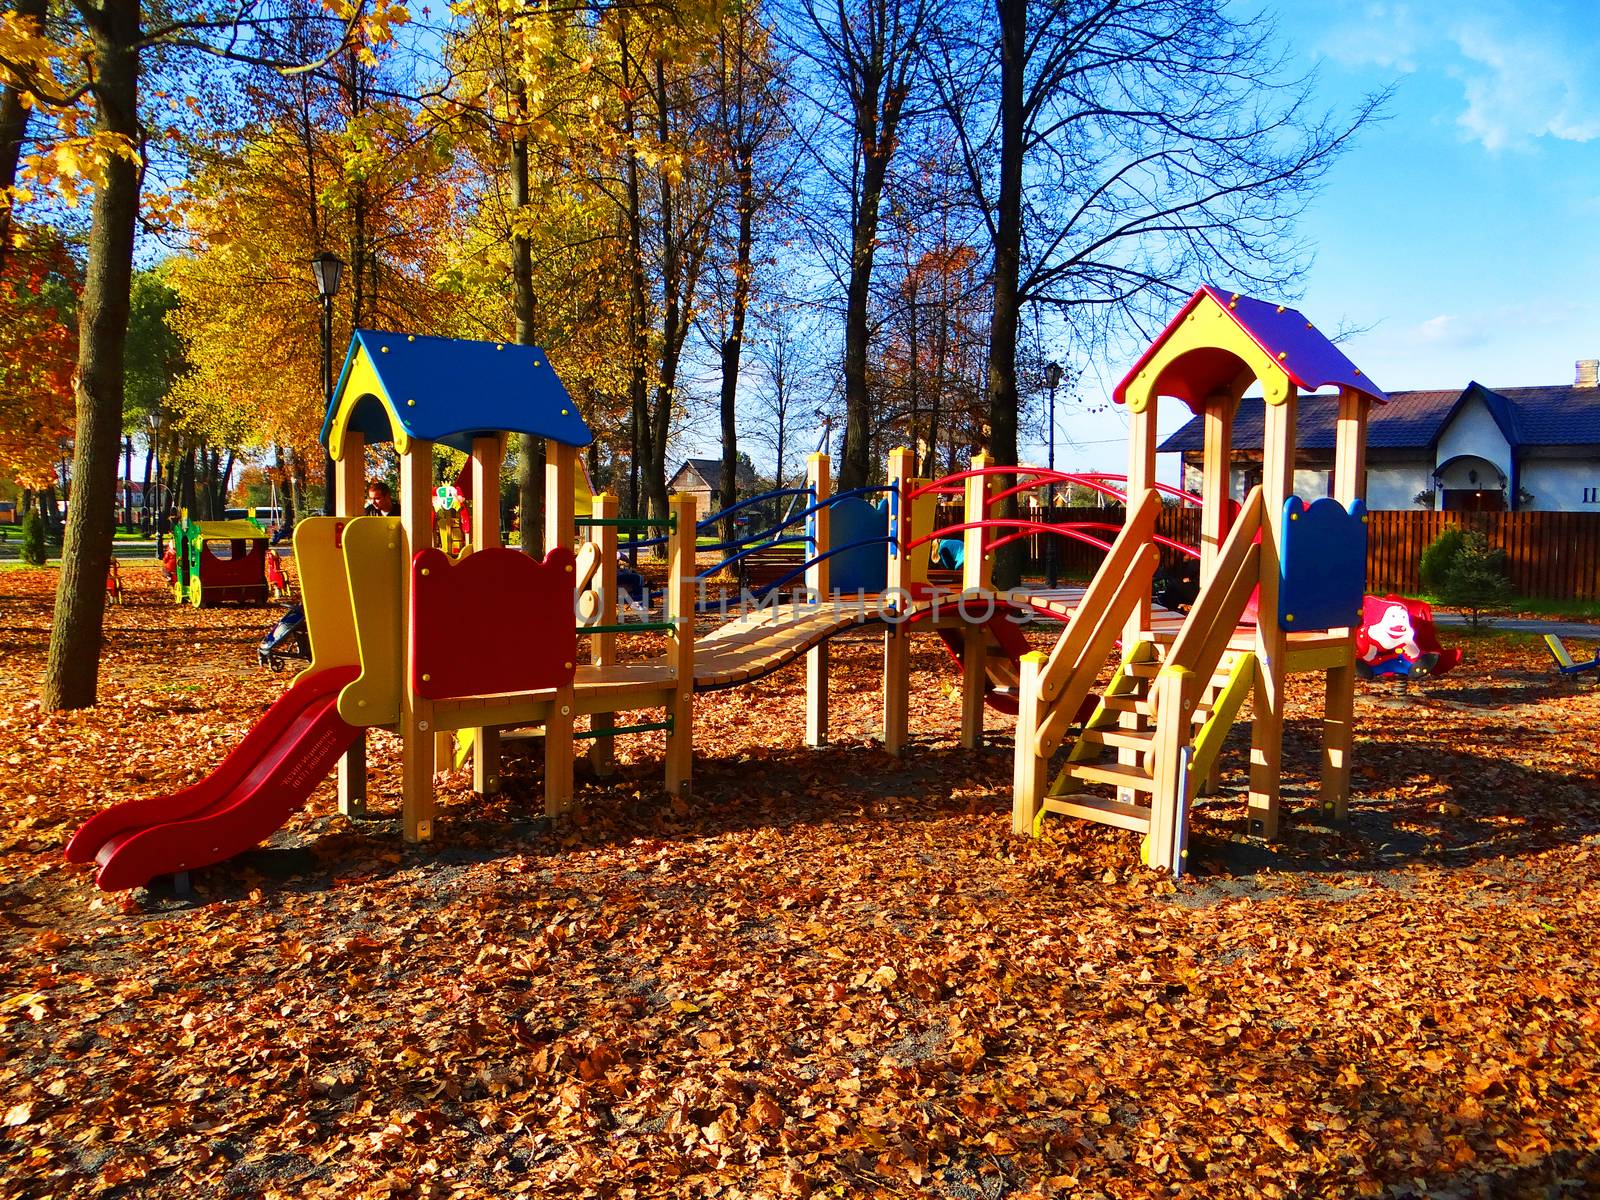 A picture of a playground in Autumn by natali_brill